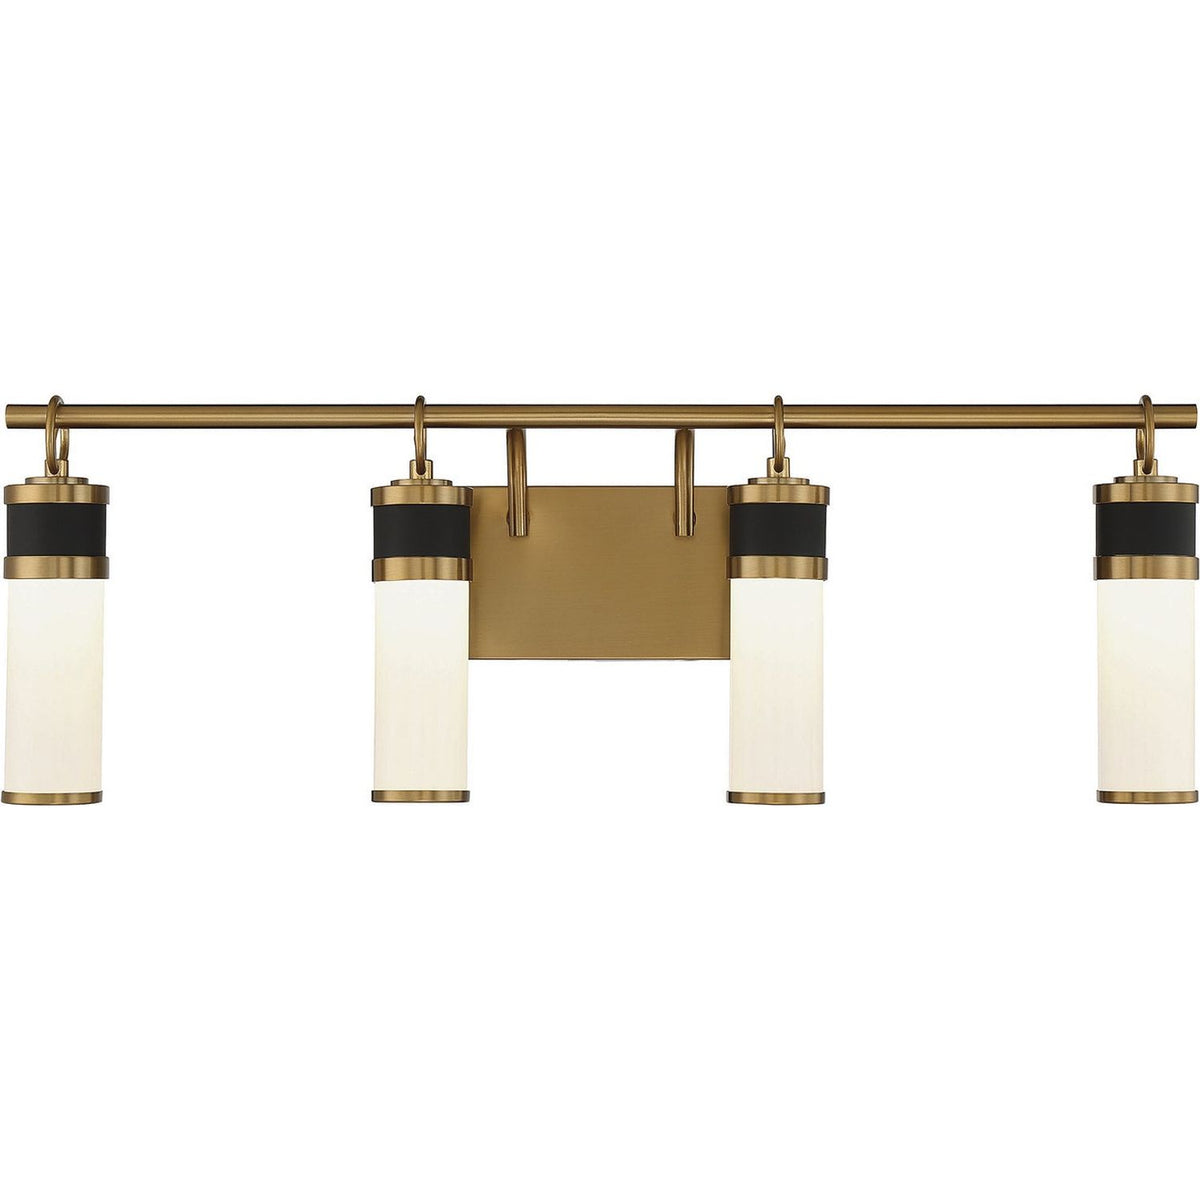 Savoy House - 8-1638-4-143 - LED Bathroom Vanity - Abel - Matte Black with Warm Brass Accents